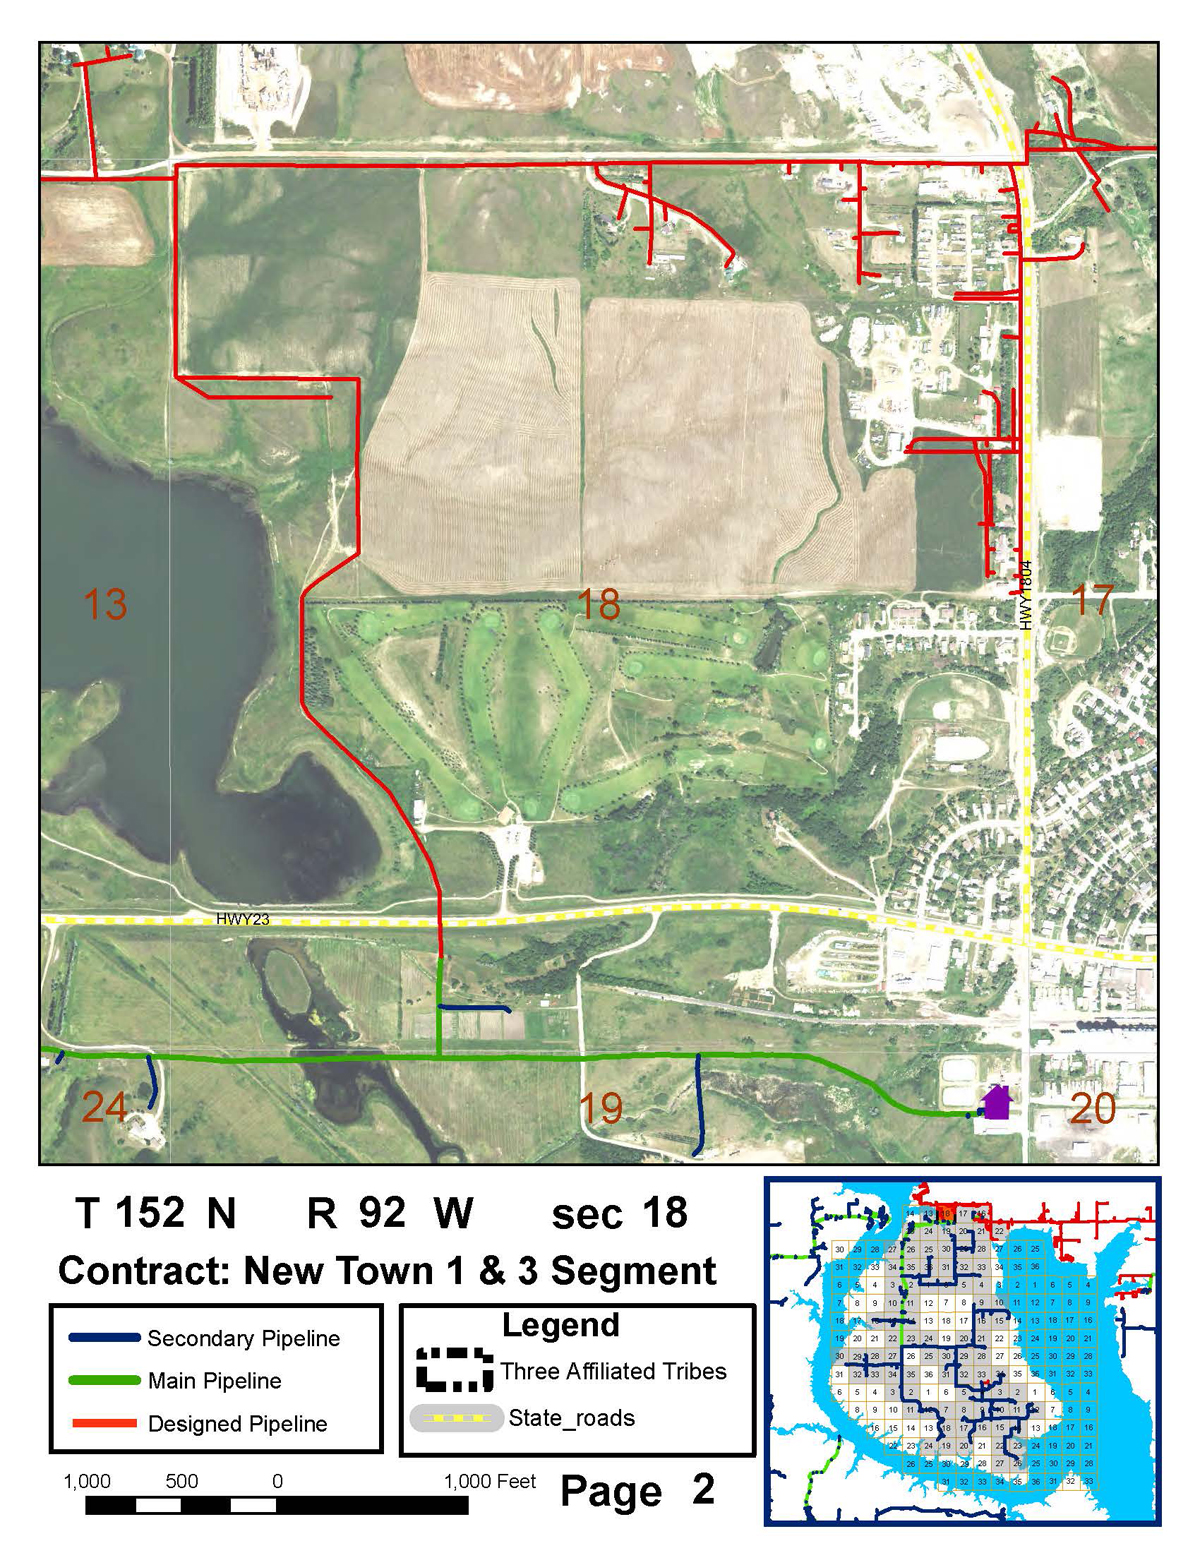 Mapbook page of proposed pipeline construction. North is oriented toward the top of the image.